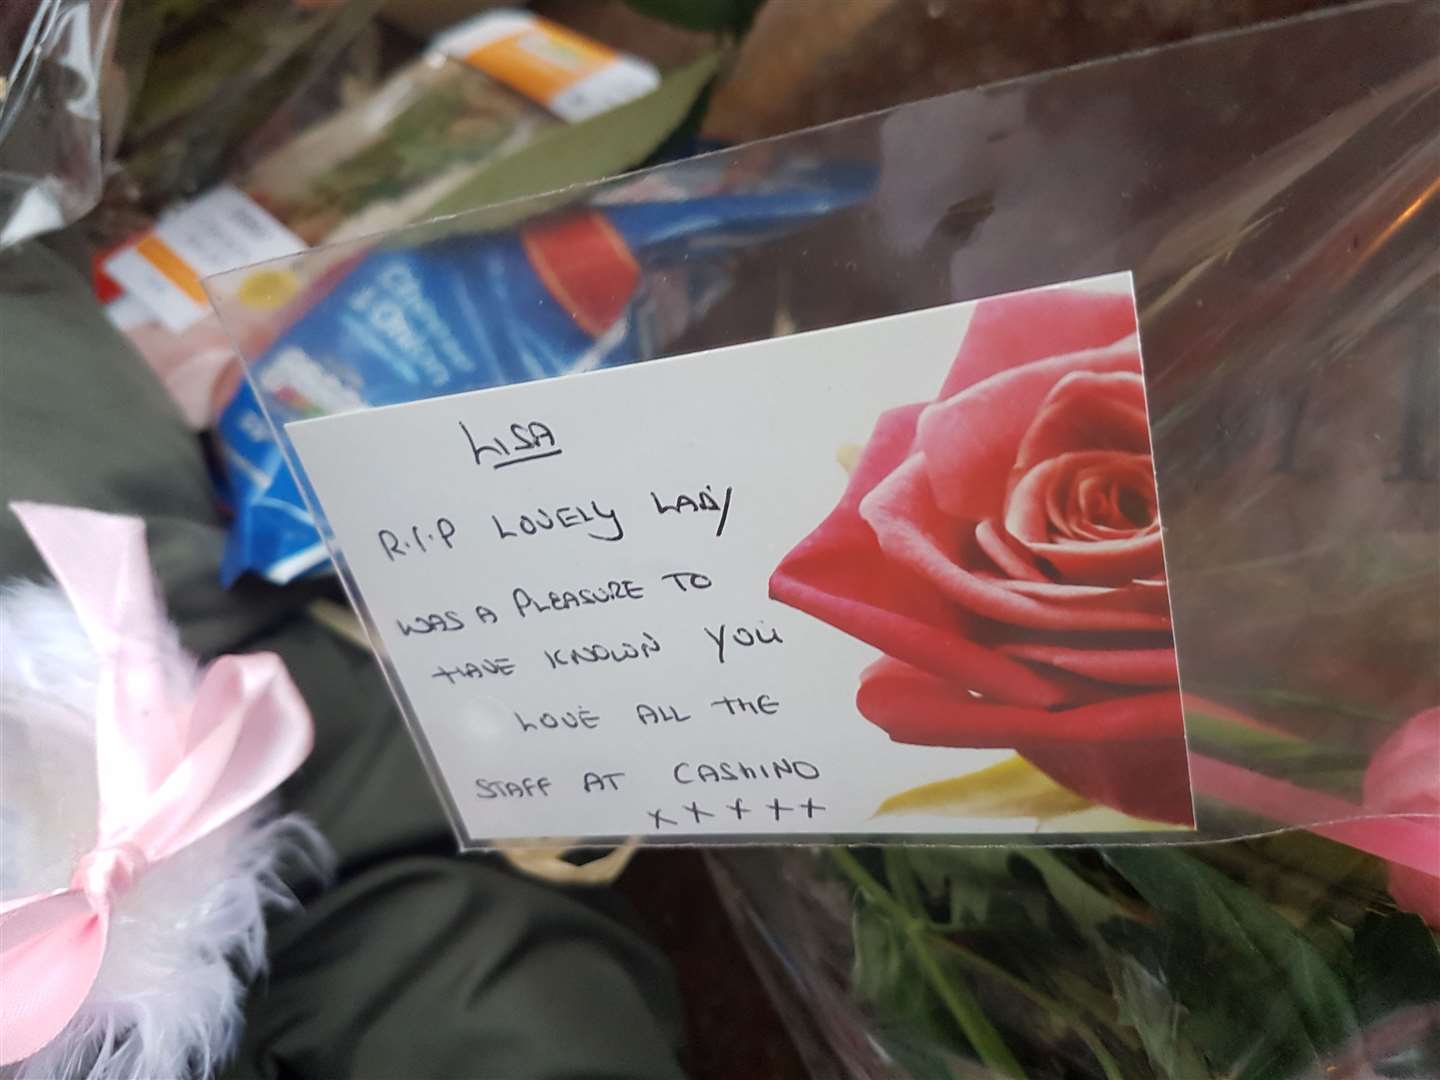 A message was left to Lisa by a nearby casino shop